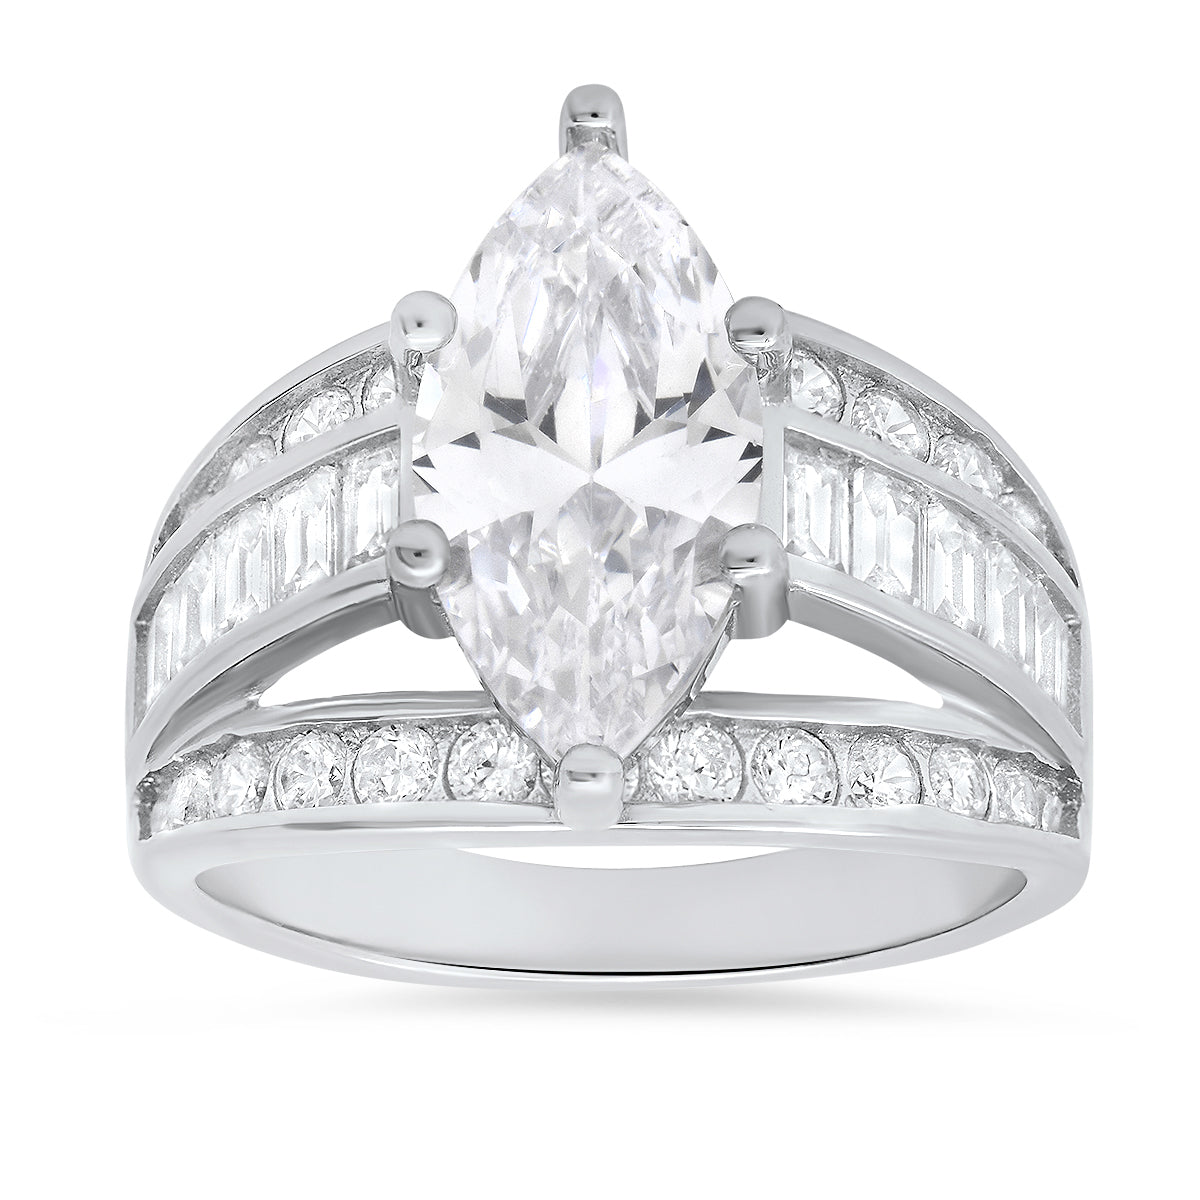 Kylie Harper Women's Marquise Cut Diamond Cz Cocktail Statement Ring In Sterling Silver In White